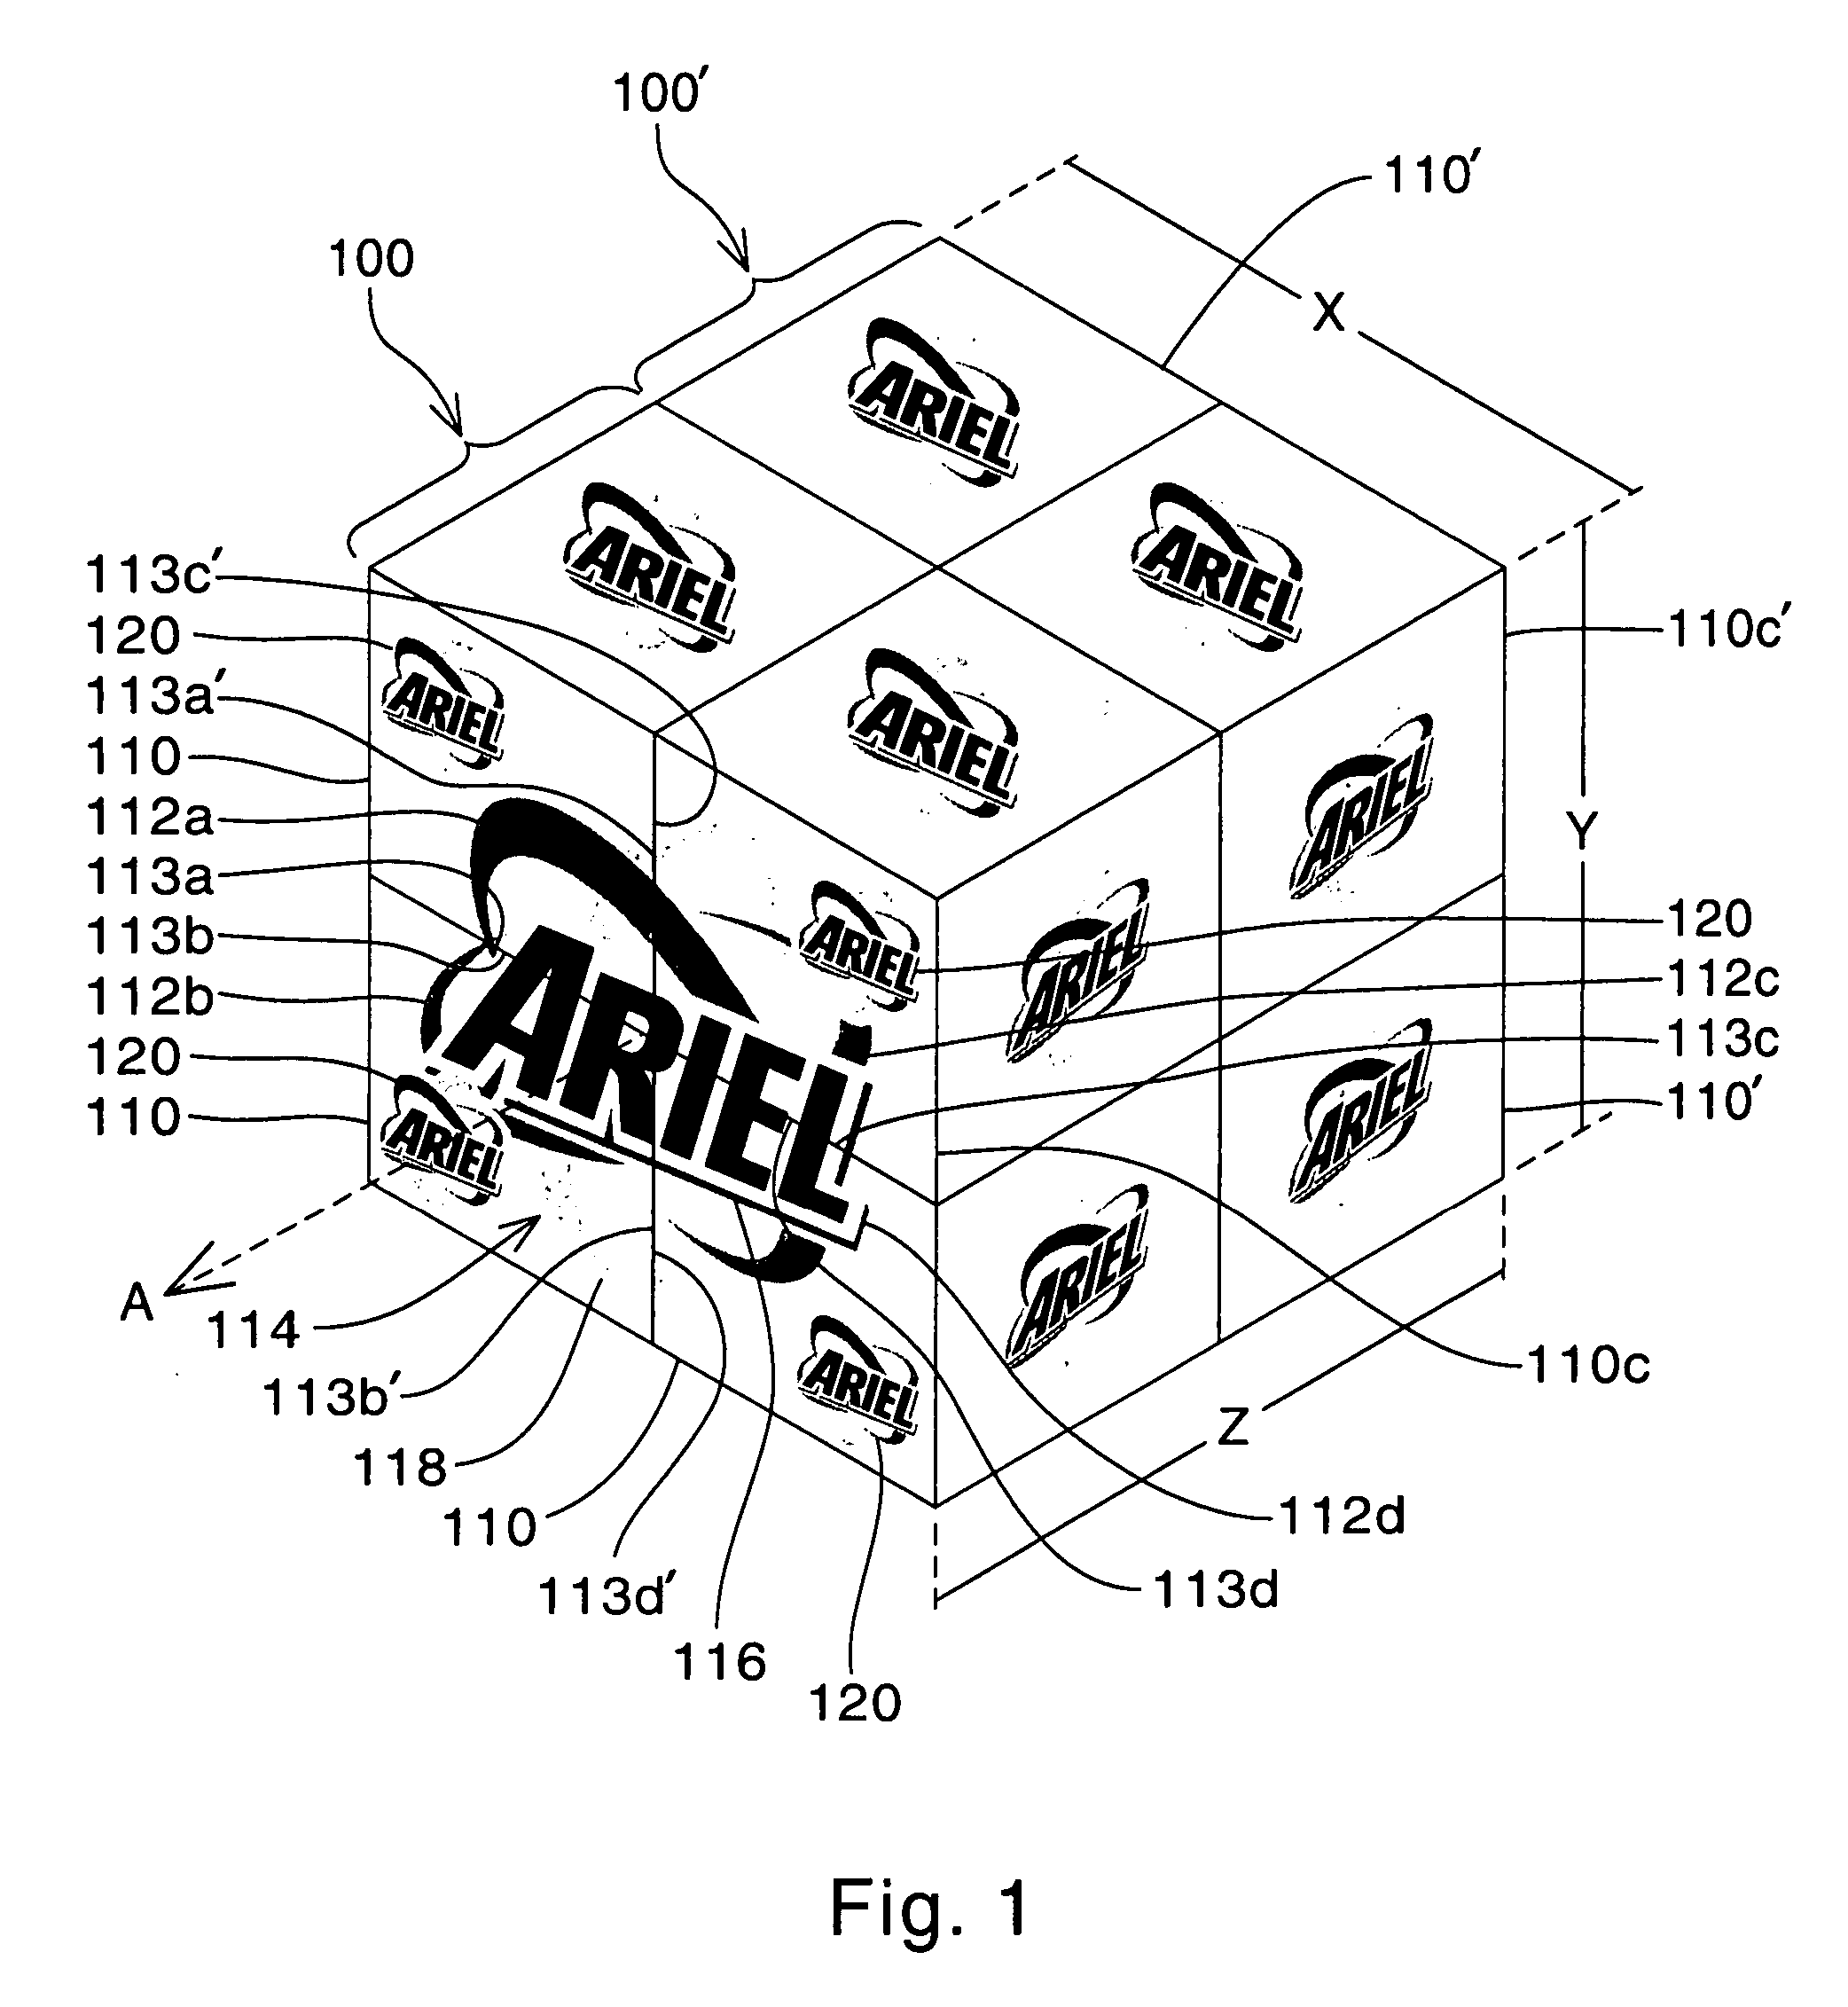 Stacked product array with enhanced visibility and recognition